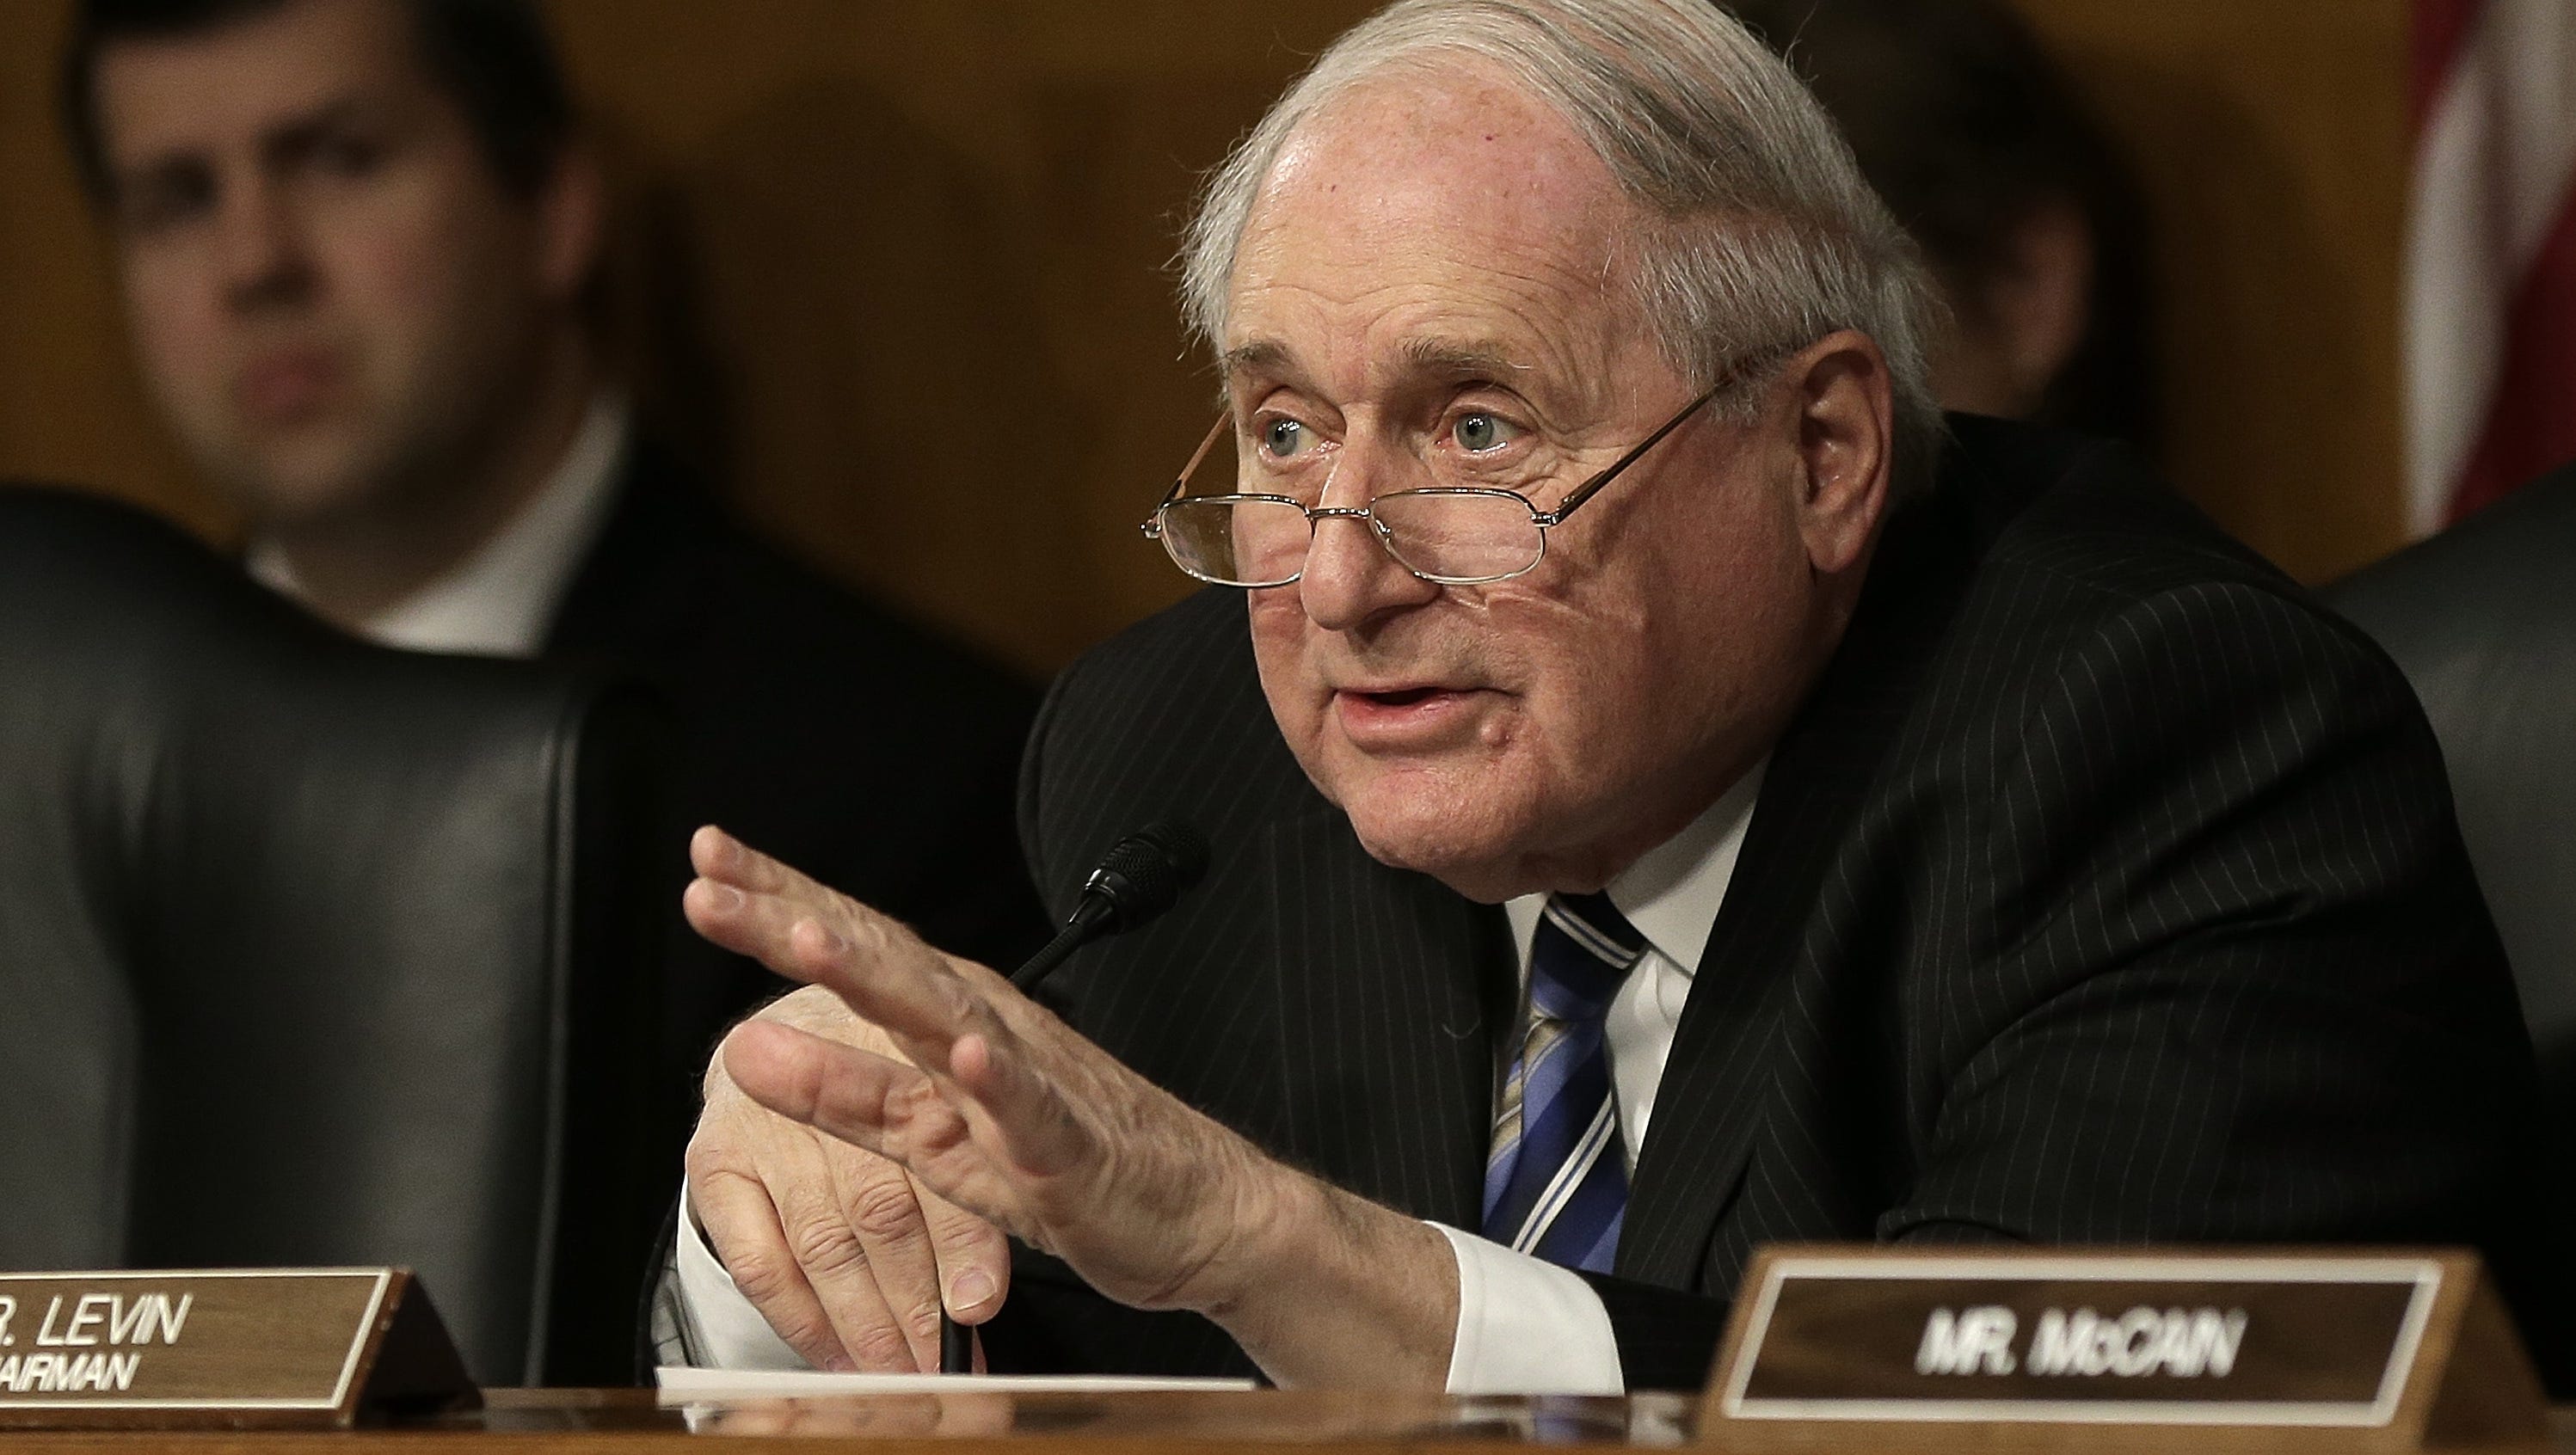 Sen. Carl Levin questions a witness during a hearing of the Permanent Subcommittee on Investigations of the Senate Homeland Security and Governmental Affairs Committee Nov. 20, 2014.